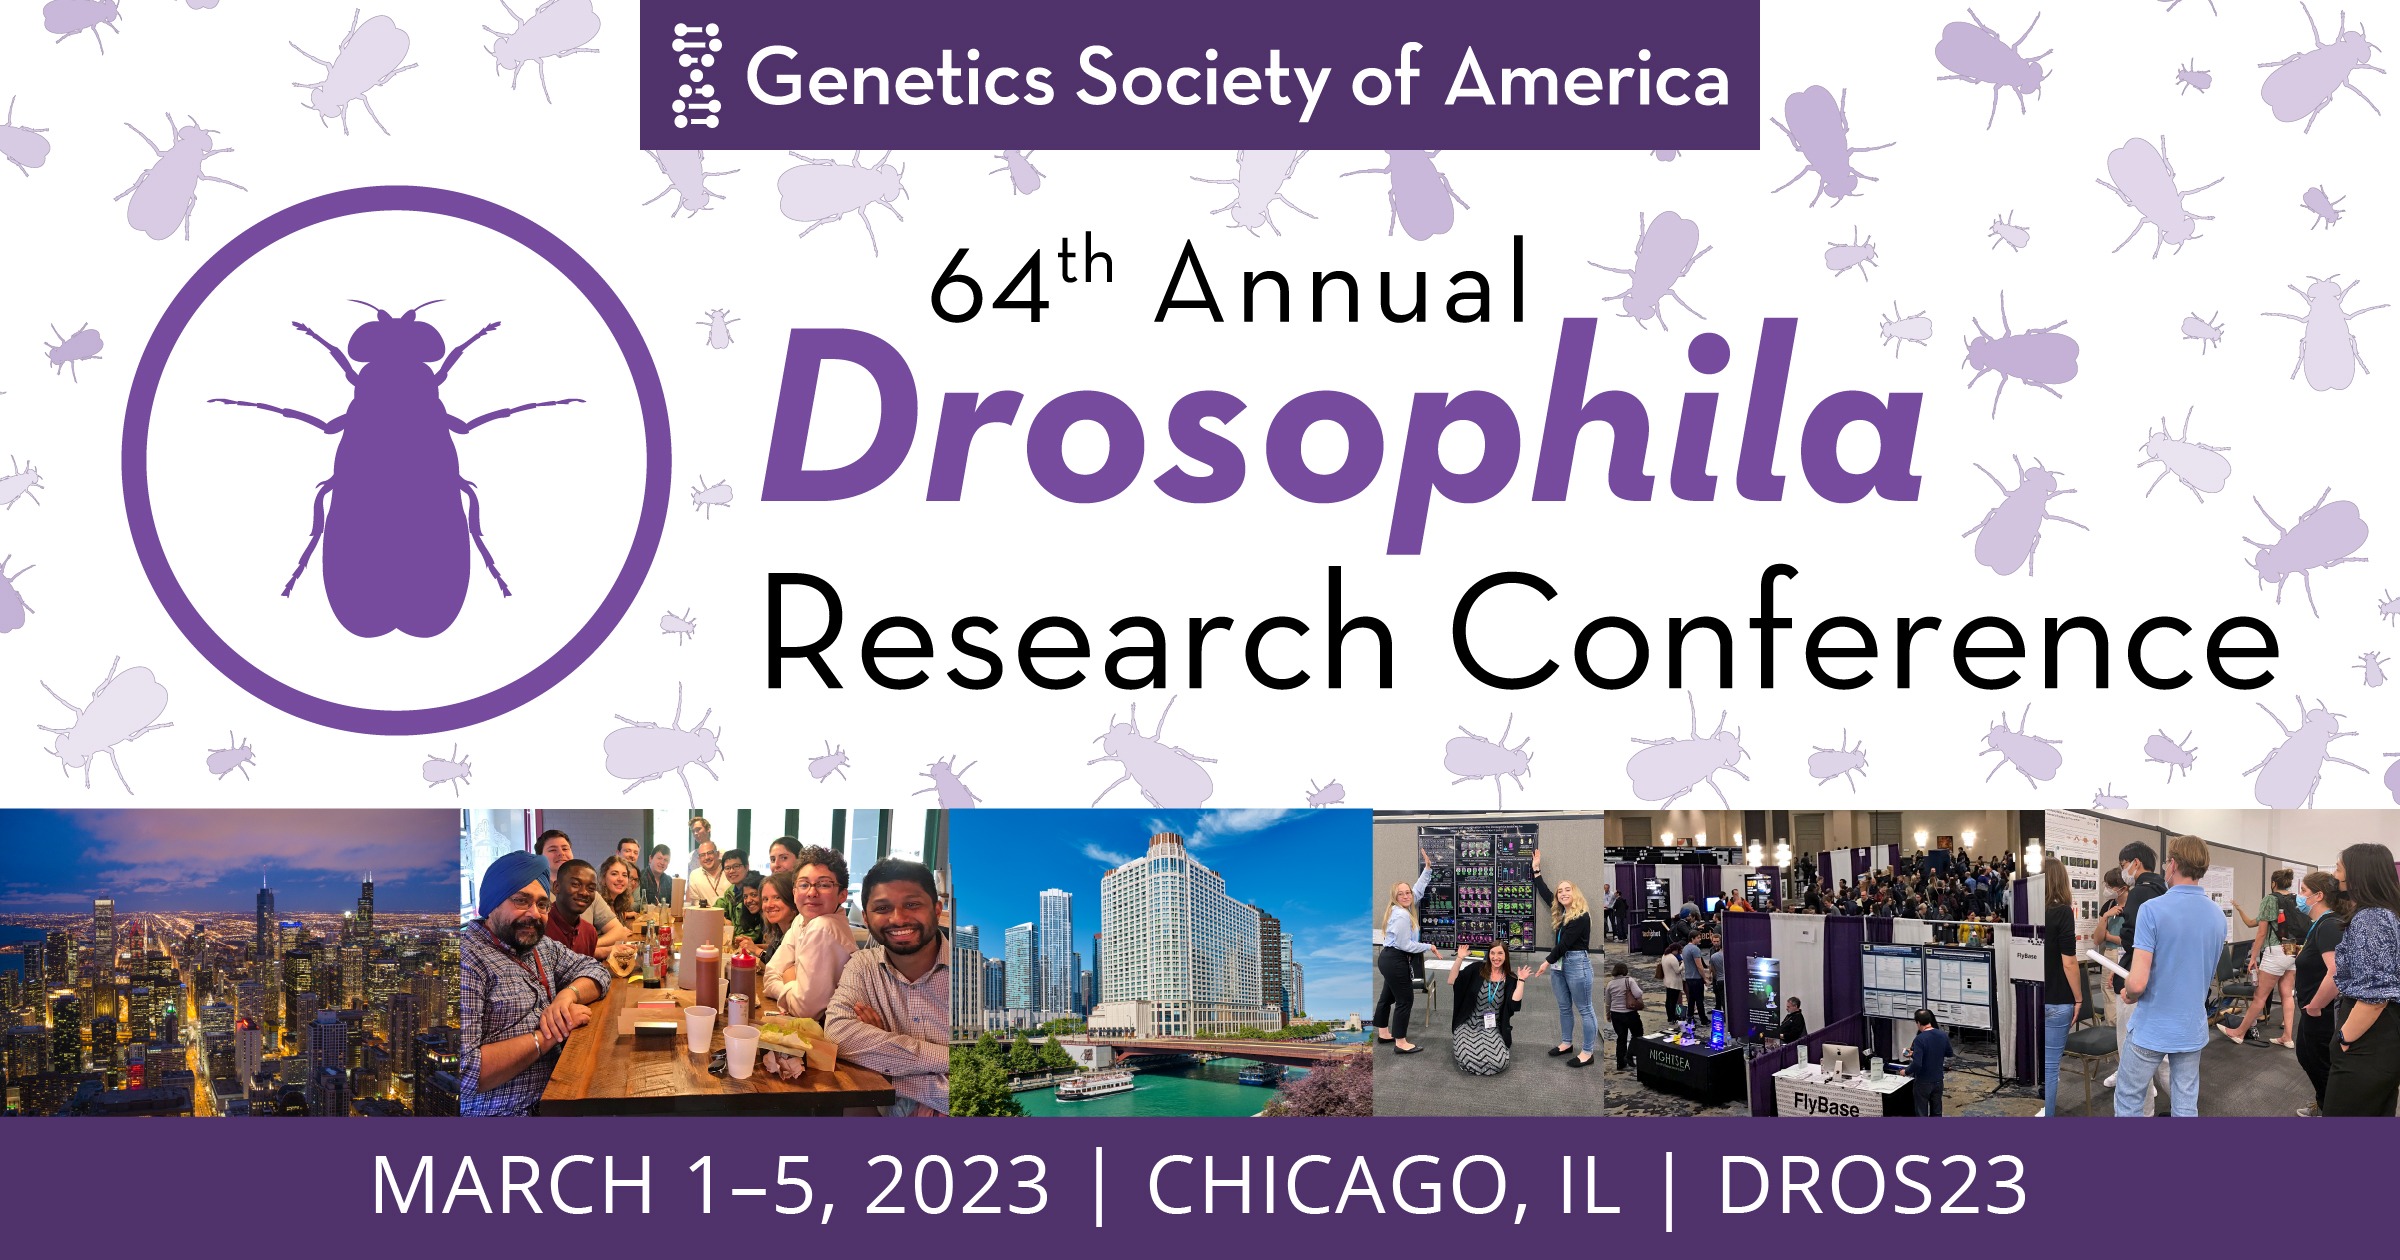 Registration 64th Annual Drosophila Research Conference